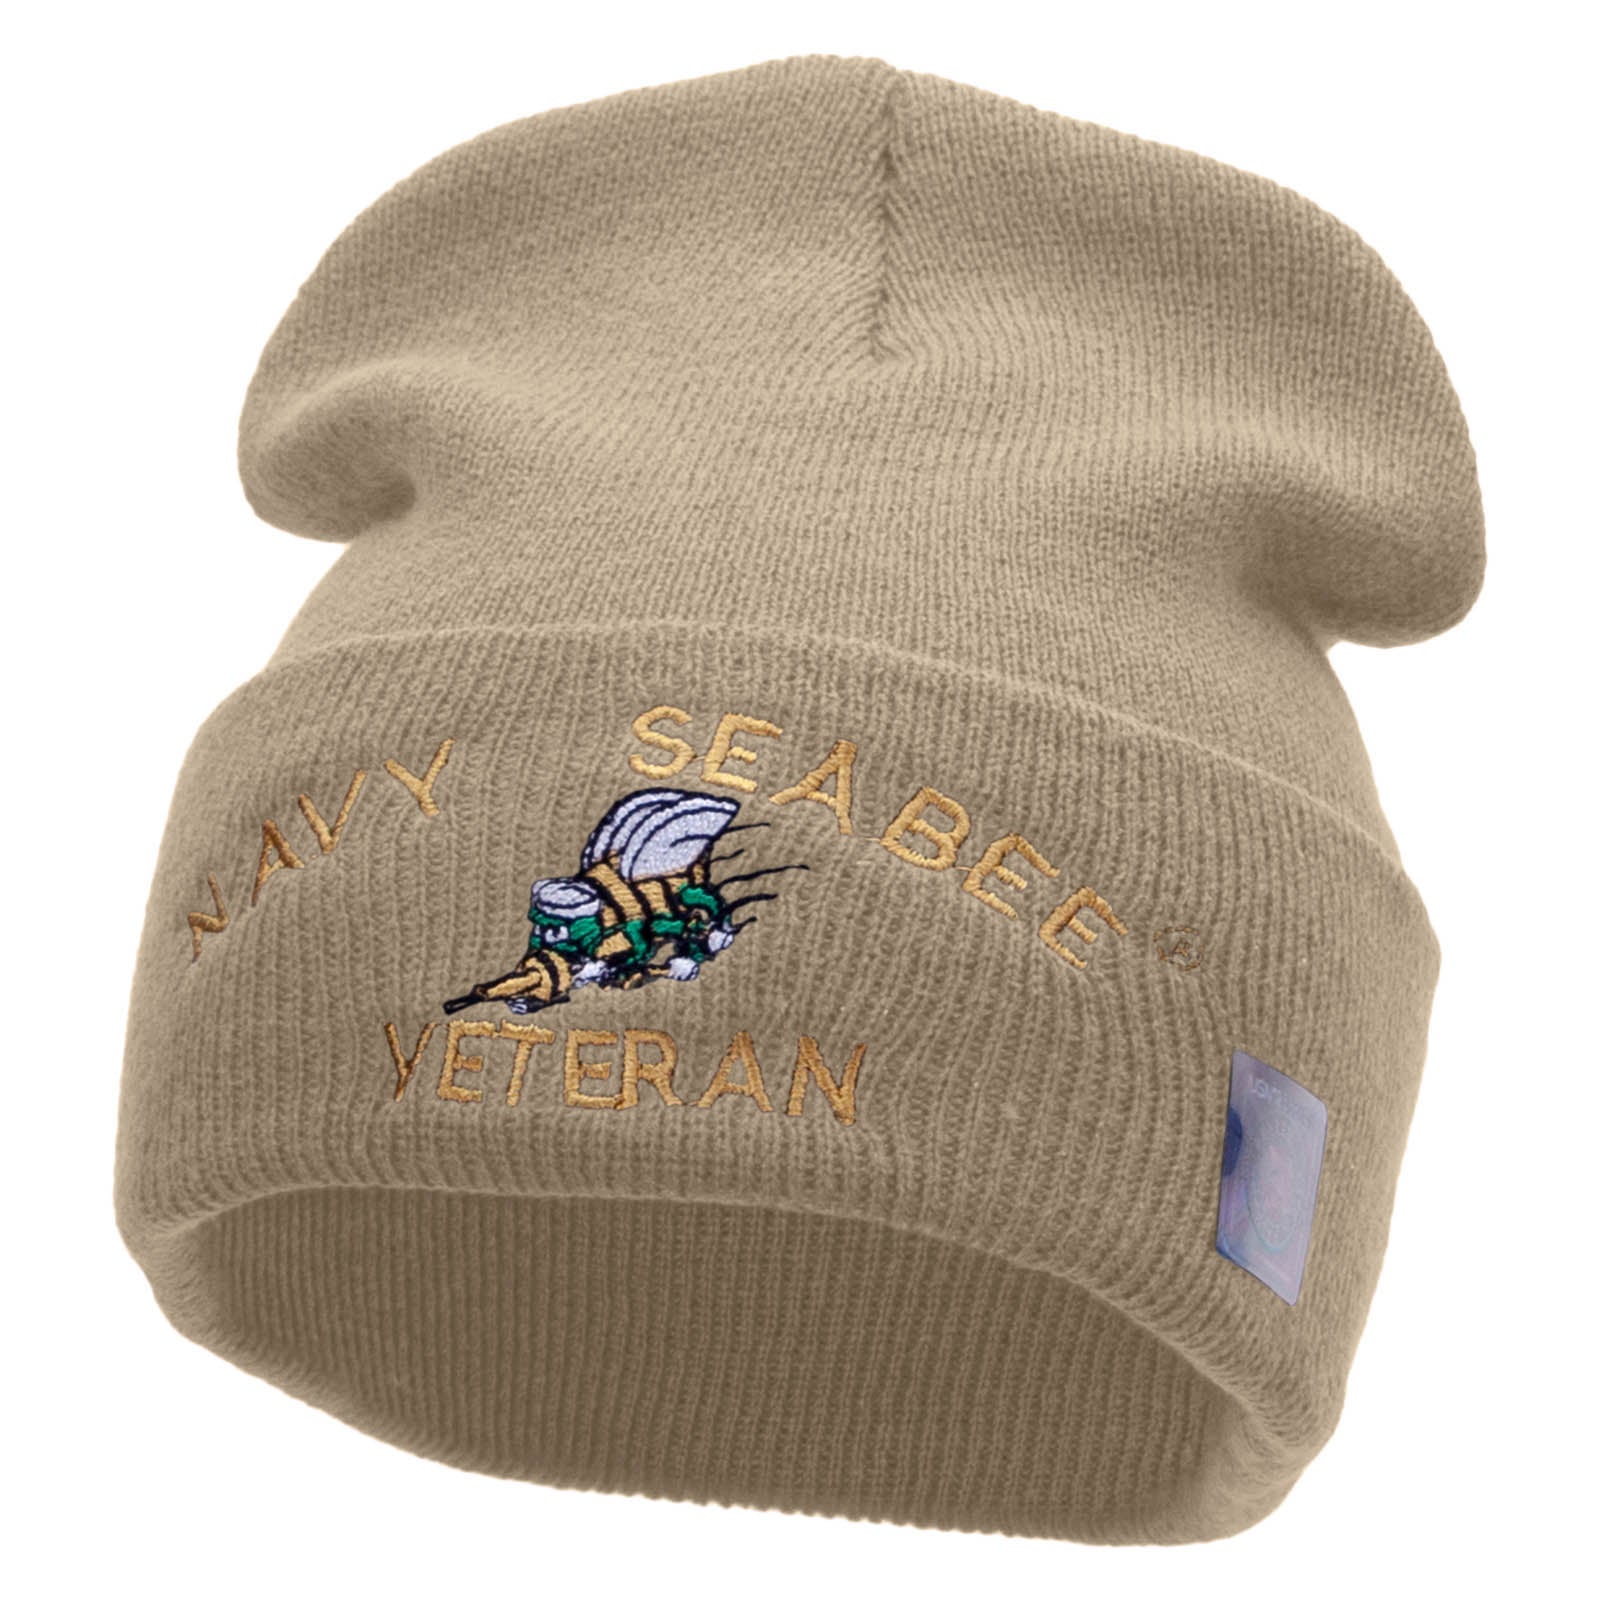 Licensed US Navy Seabee Veteran Military Embroidered Long Beanie Made in USA - Khaki OSFM